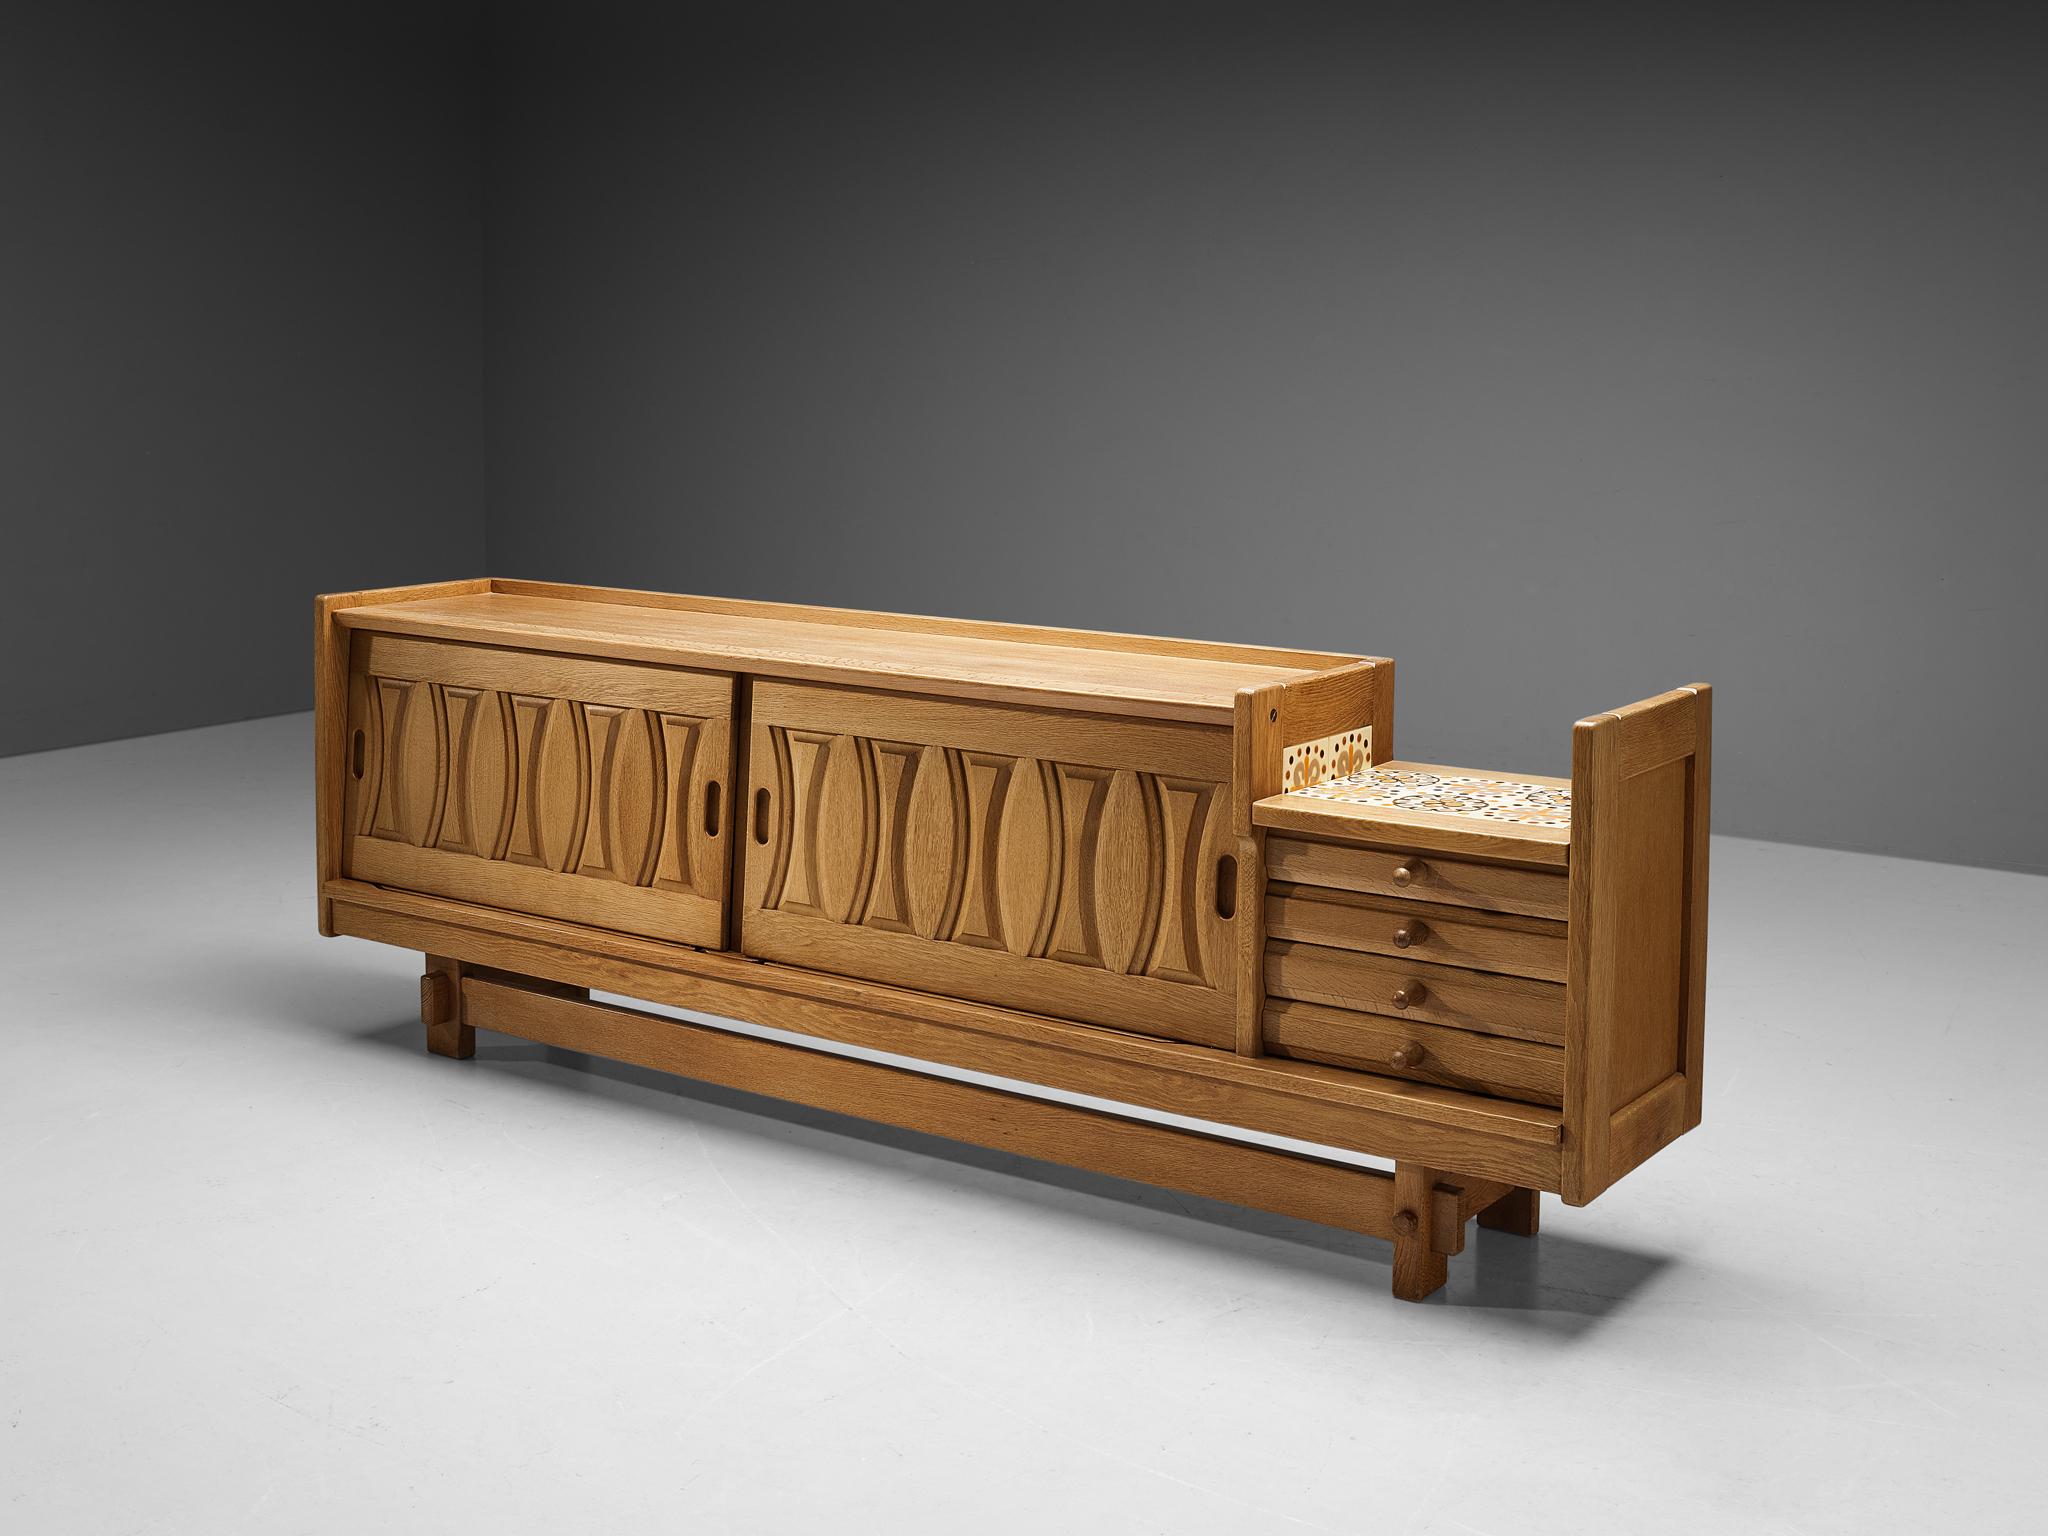 Guillerme et Chambron for Votre Maison, 'Simon' sideboard, oak, ceramics, France, 1960s.

Simon credenza in oak by French designers Guillerme & Chambron. This sideboard is equipped with two sliding doors and a set of four drawers. The front of the